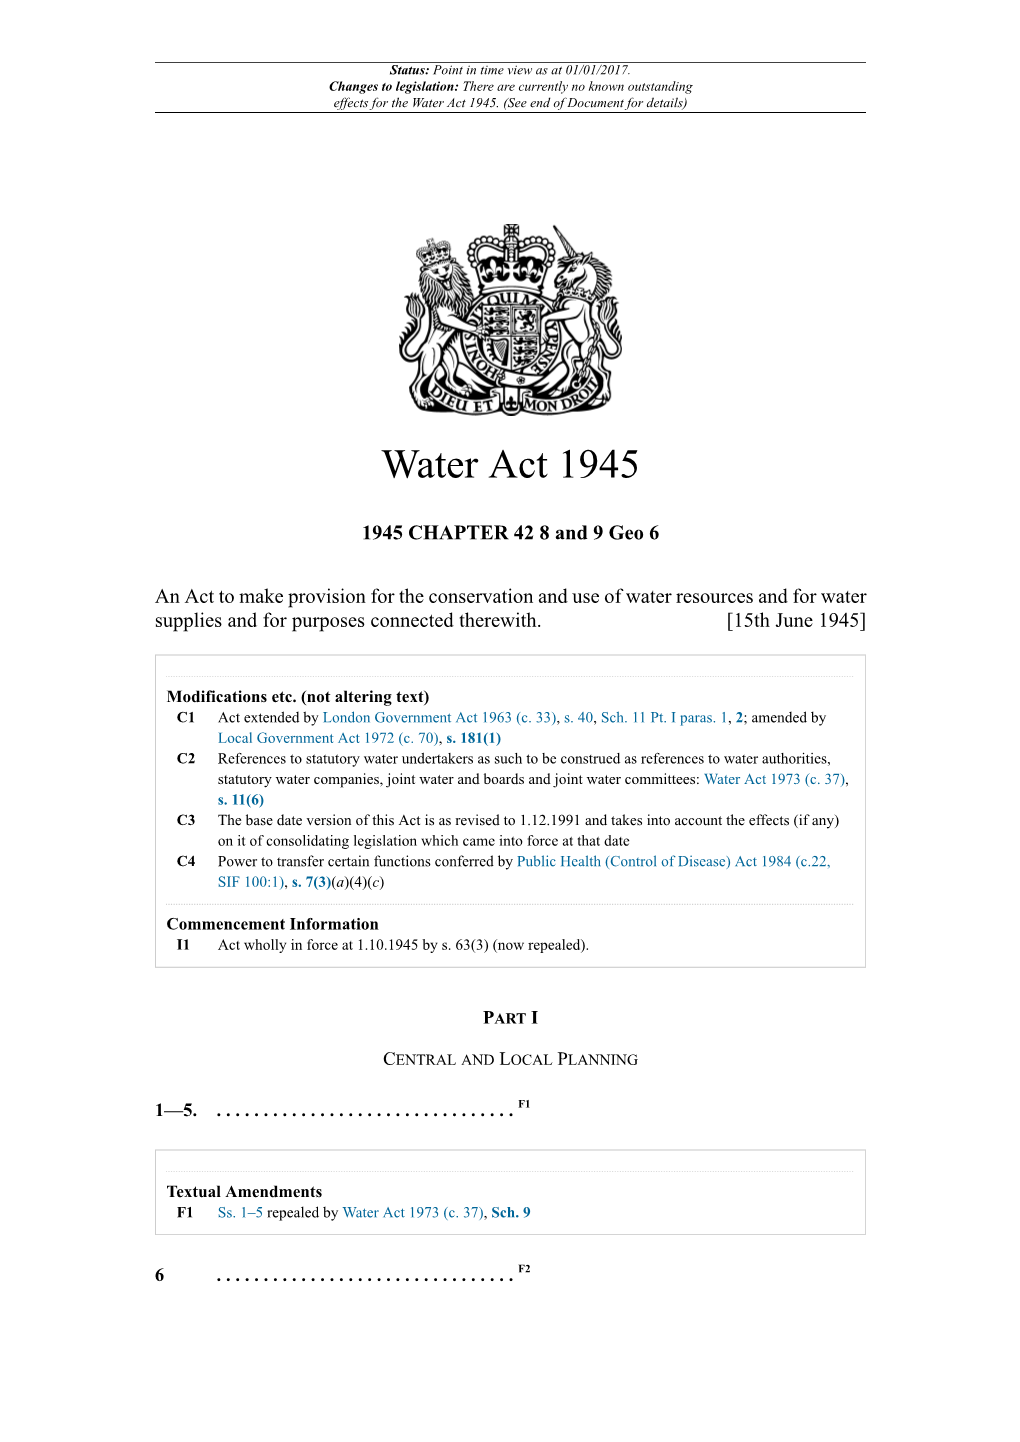 Water Act 1945